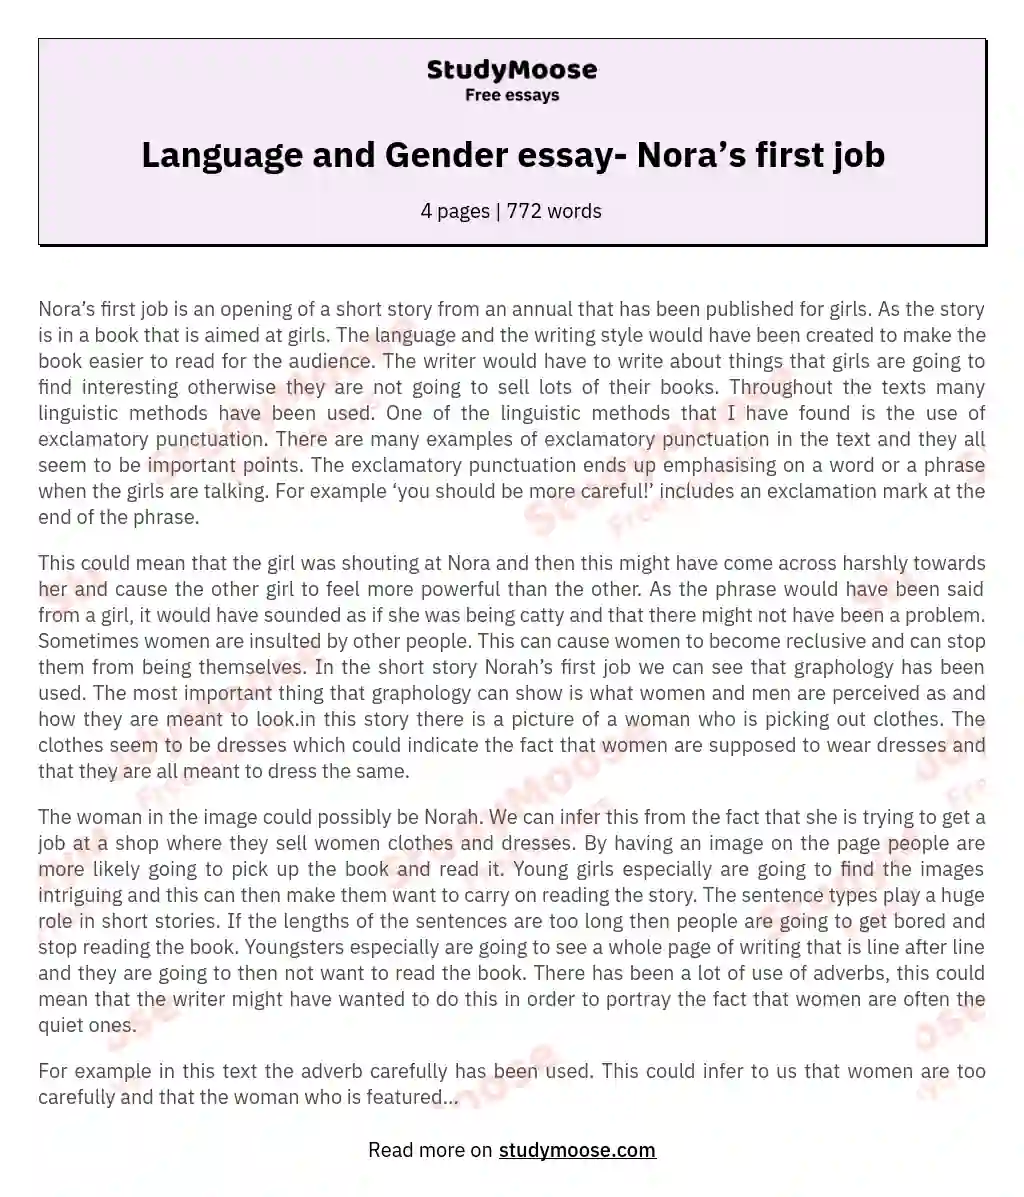 Language and Gender essay- Nora’s first job